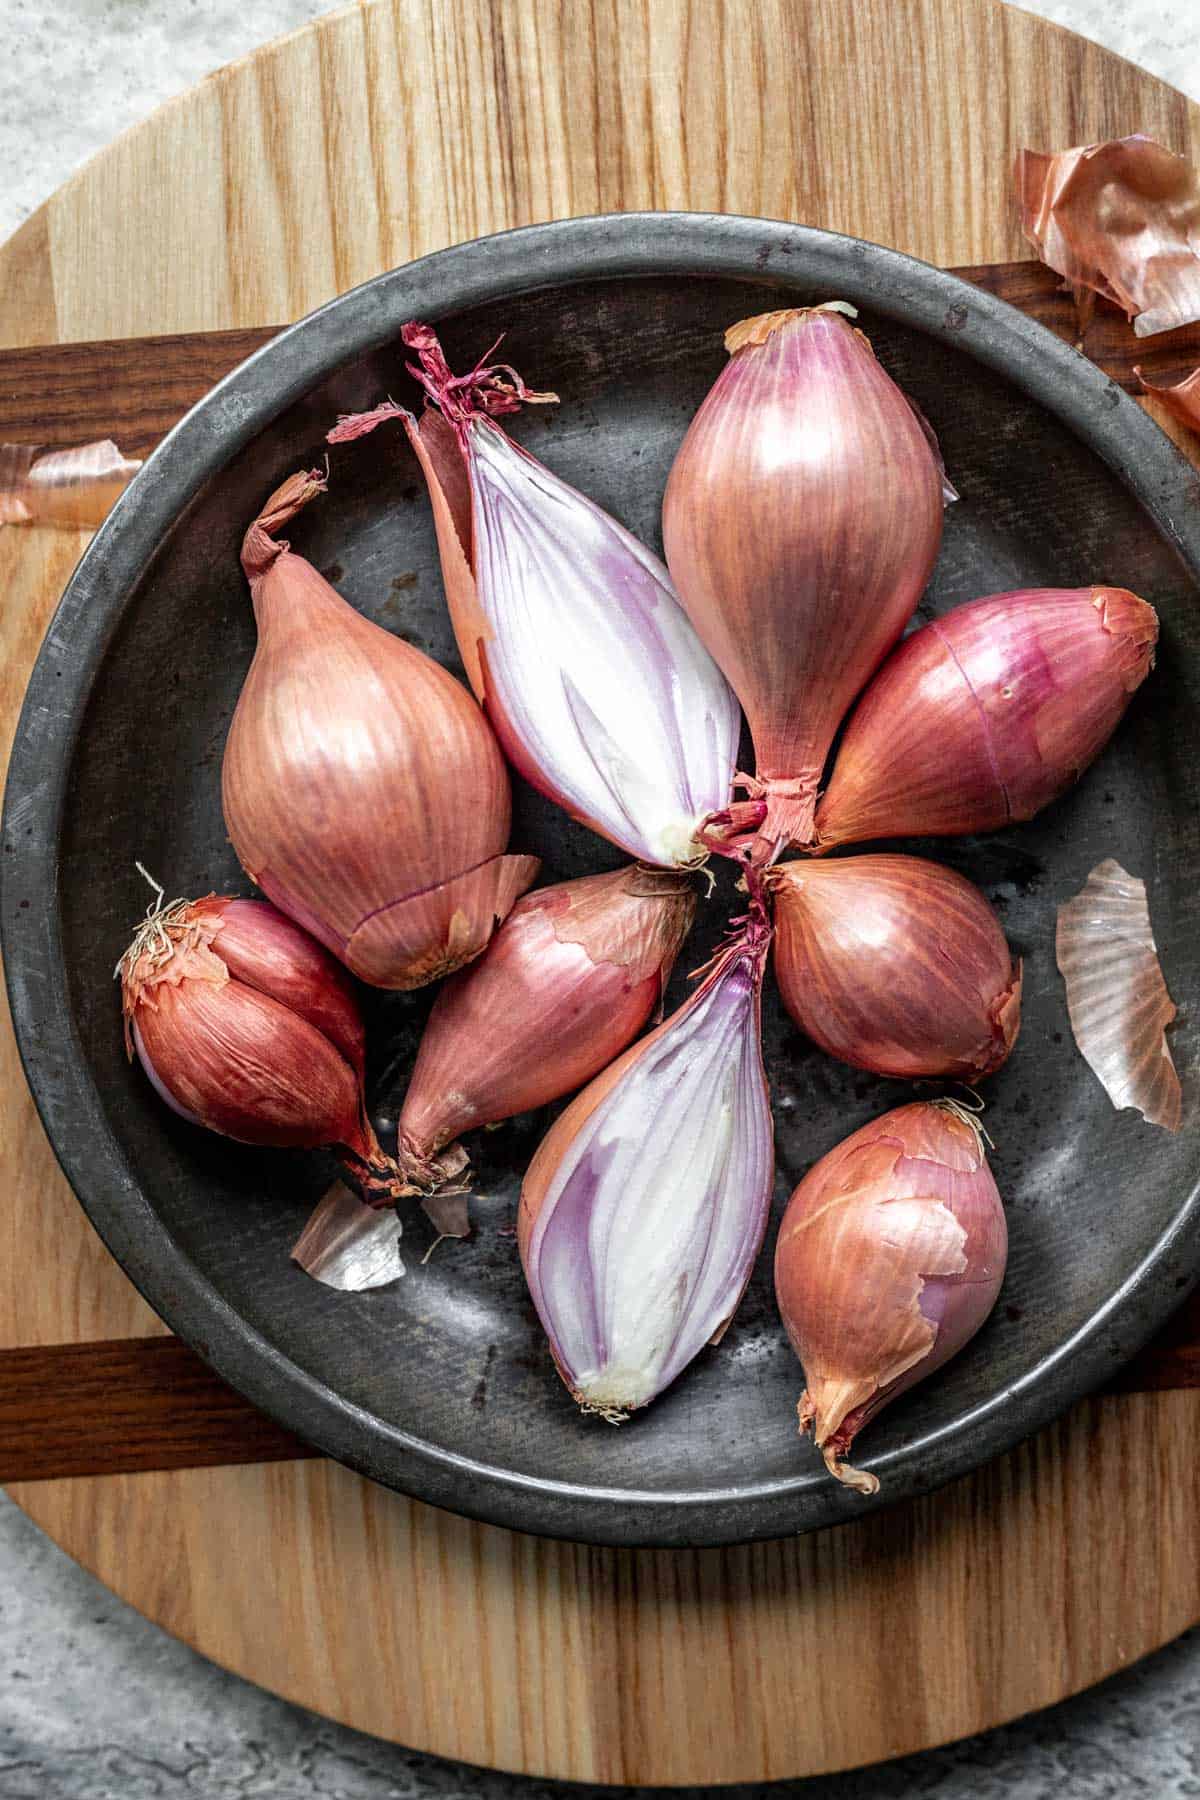 A bunch of shallots in a metal dish.